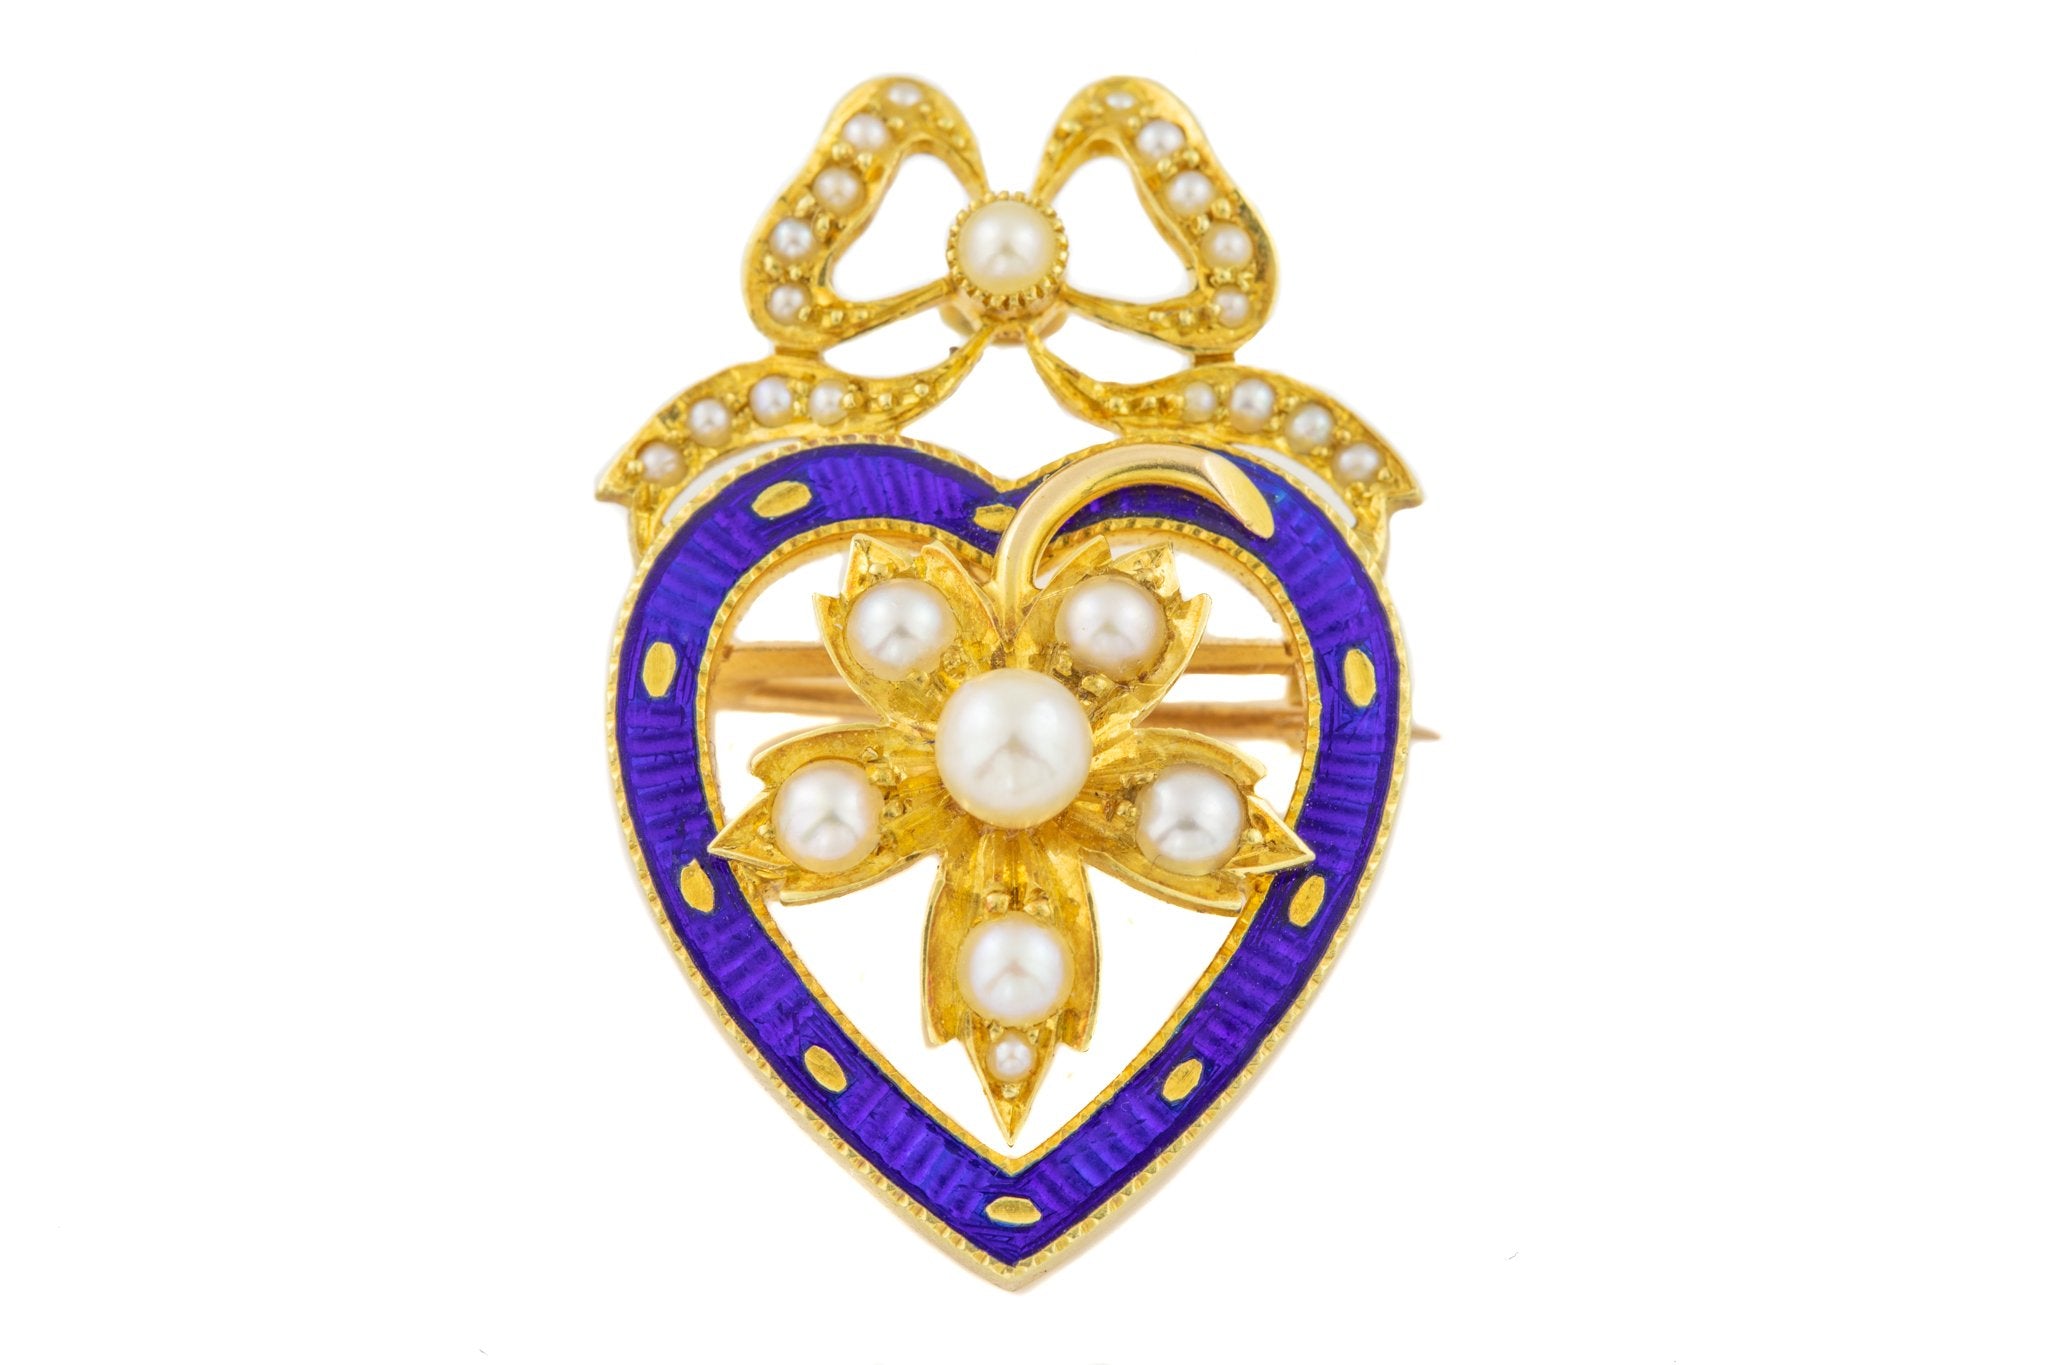 Edwardian 15ct Gold Pearl Heart Pendant, with Brooch Attachment